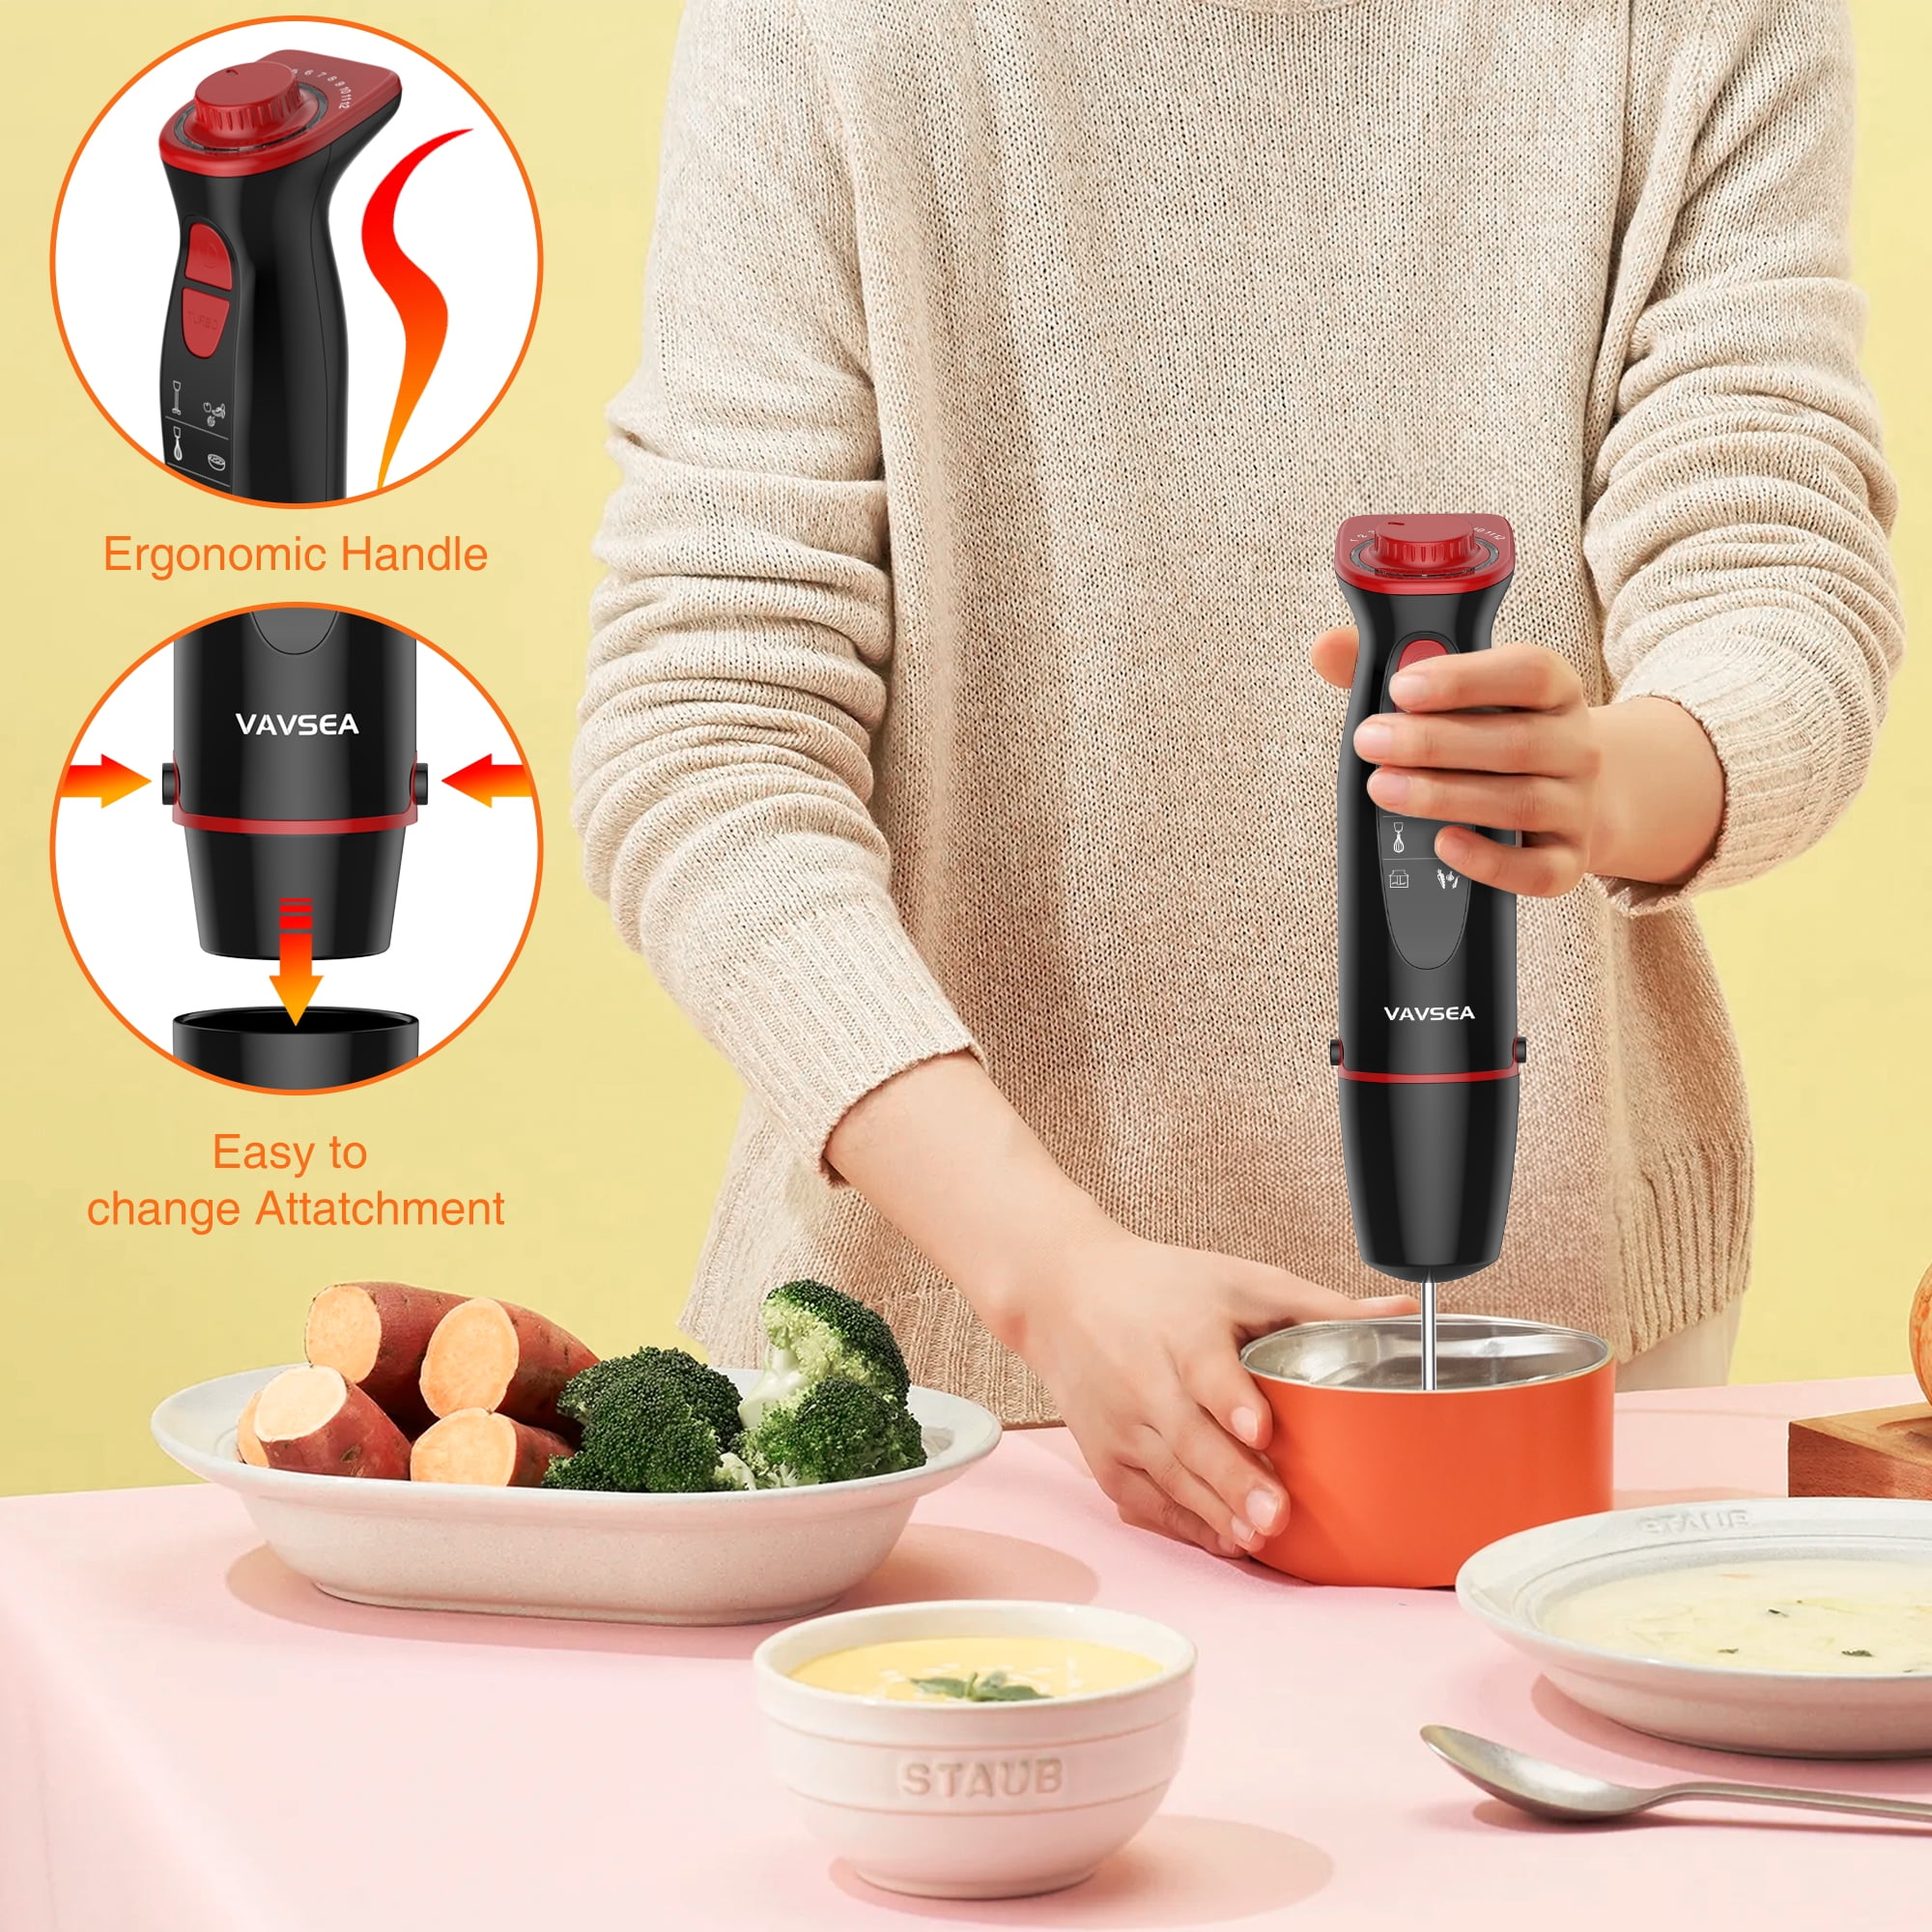  Gavasto Immersion Blender 600 Watts Scratch Resistant Hand  Blender,15 Speed and Turbo Mode Hand Mixer, Heavy Duty Copper Motor  Stainless Steel Smart Stick for Soup, Smoothie, Puree, Baby Food: Home 